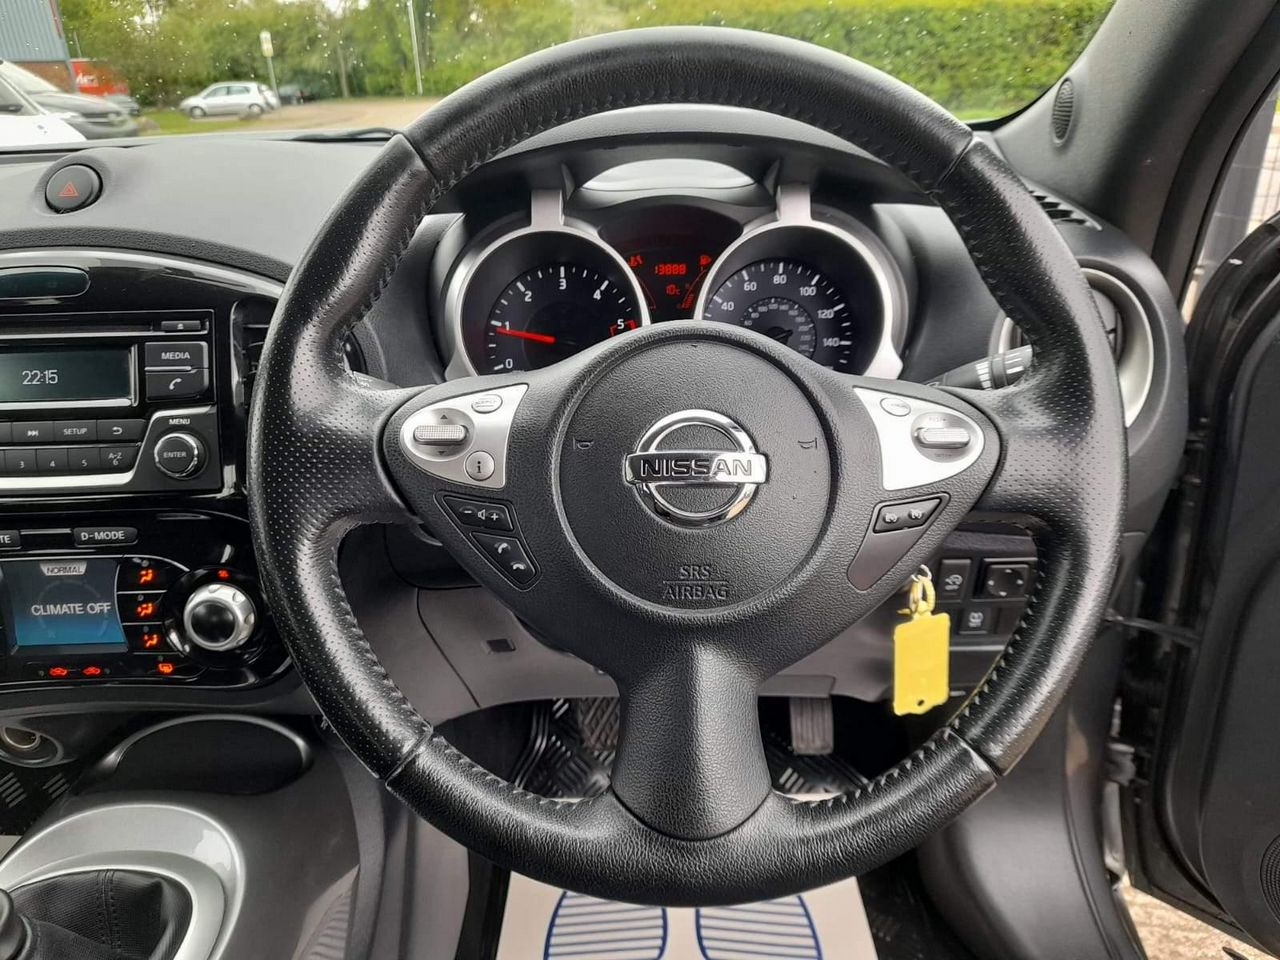 2014 Nissan Juke 1.5 dCi 8v Acenta Euro 5 (s/s) 5dr - Picture 38 of 48